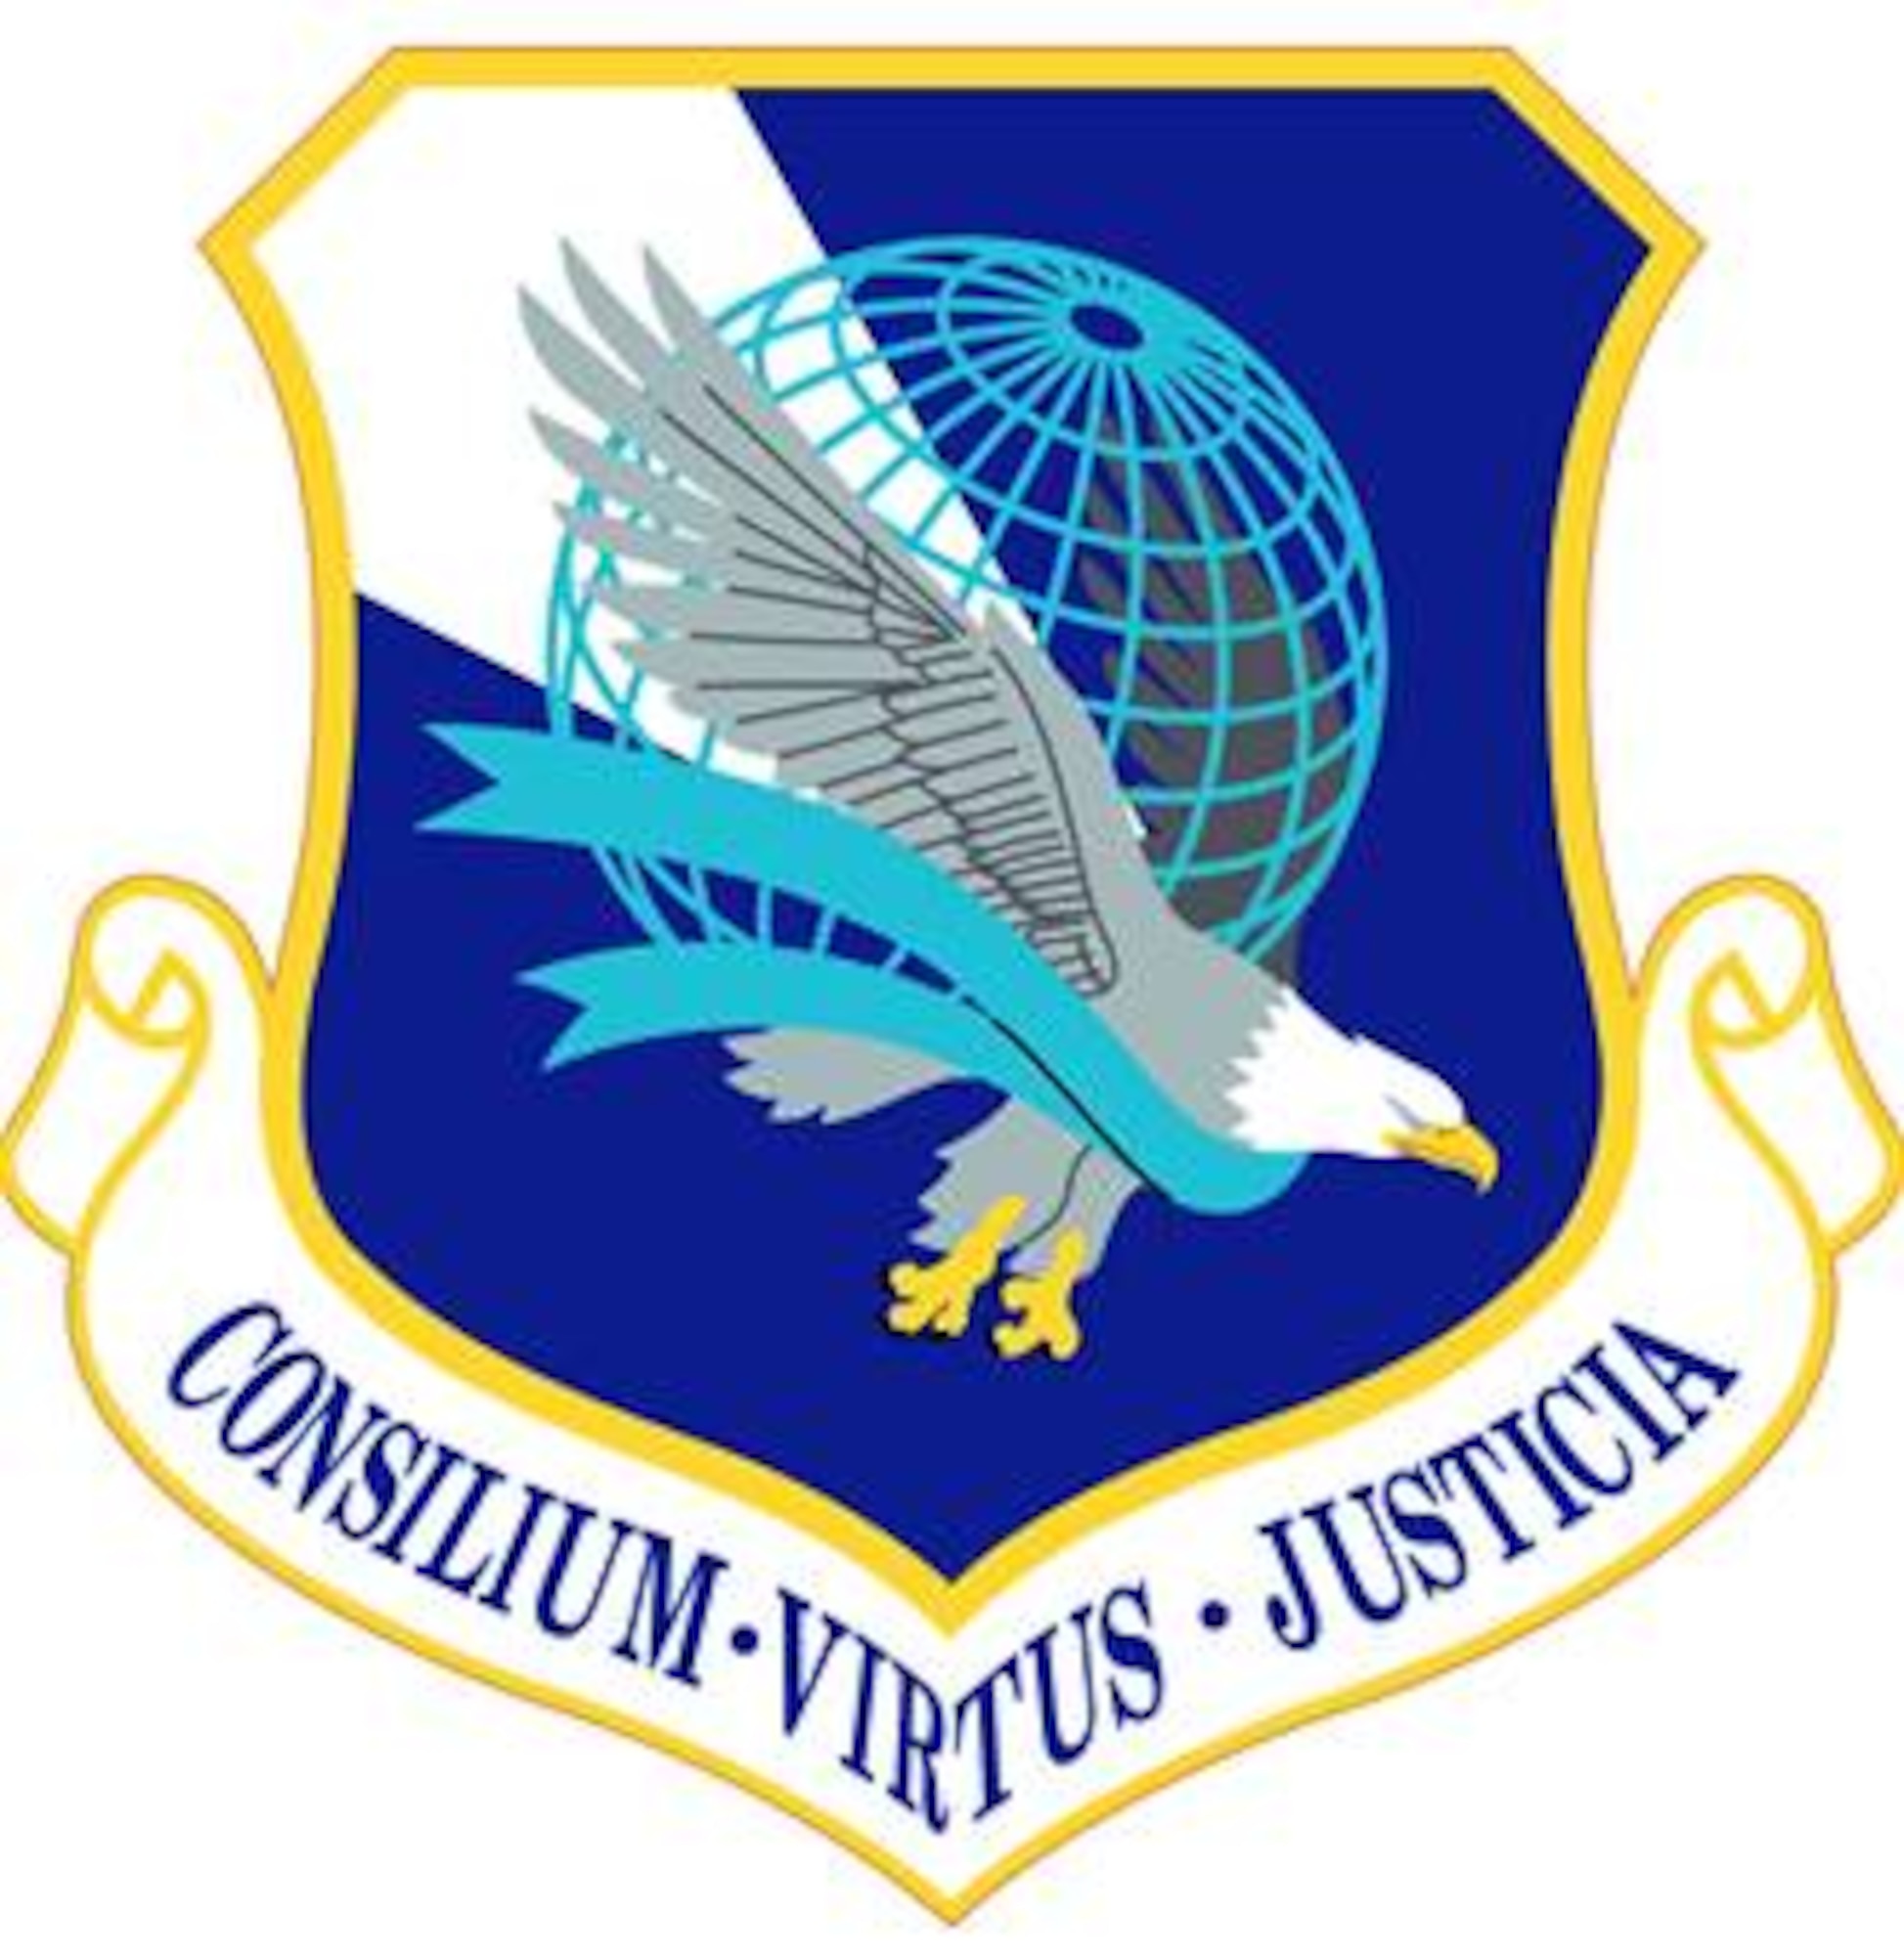 Air Force Legal Operations Agency (Color). Image provided by the Air Force Historical Research Agency. In accordance with Chapter 3 of AFI 84-105, commercial reproduction of this emblem is NOT permitted without the permission of the proponent organizational/unit commander. The image is 7x7 inches @ 300 ppi. 